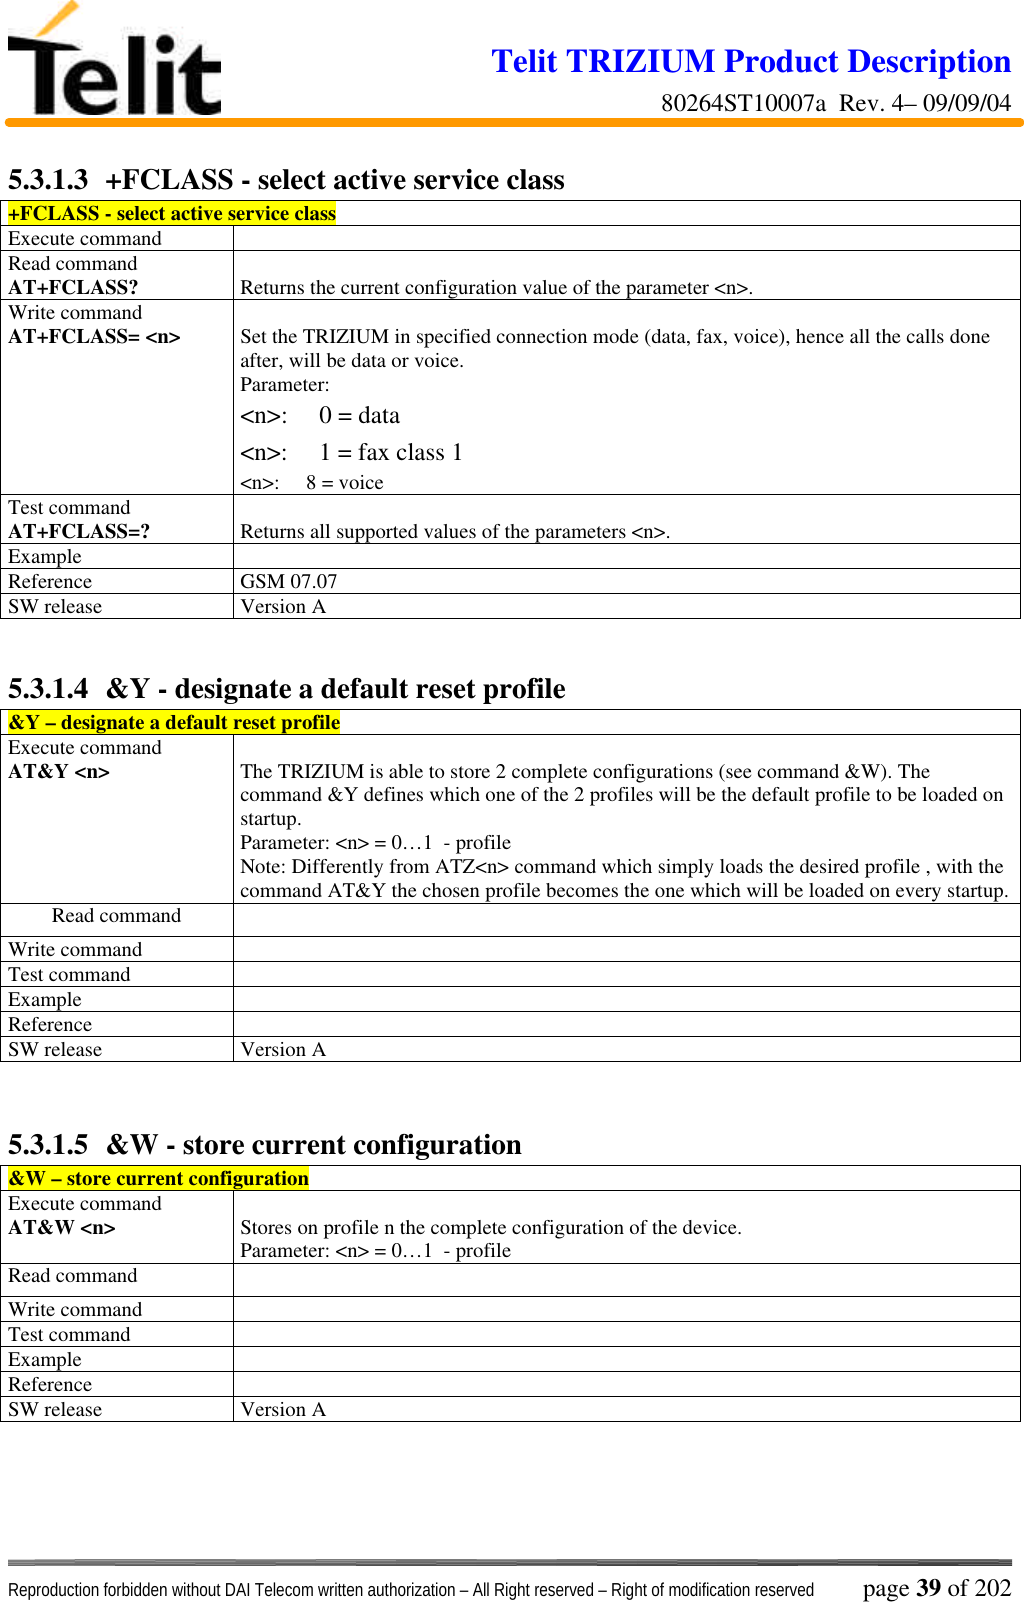 Telit TRIZIUM Product Description80264ST10007a  Rev. 4– 09/09/04Reproduction forbidden without DAI Telecom written authorization – All Right reserved – Right of modification reserved page 39 of 2025.3.1.3  +FCLASS - select active service class+FCLASS - select active service classExecute commandRead commandAT+FCLASS? Returns the current configuration value of the parameter &lt;n&gt;.Write commandAT+FCLASS= &lt;n&gt; Set the TRIZIUM in specified connection mode (data, fax, voice), hence all the calls doneafter, will be data or voice.Parameter:&lt;n&gt;:     0 = data&lt;n&gt;:     1 = fax class 1&lt;n&gt;:     8 = voiceTest commandAT+FCLASS=? Returns all supported values of the parameters &lt;n&gt;.ExampleReference GSM 07.07SW release Version A5.3.1.4  &amp;Y - designate a default reset profile&amp;Y – designate a default reset profileExecute commandAT&amp;Y &lt;n&gt; The TRIZIUM is able to store 2 complete configurations (see command &amp;W). Thecommand &amp;Y defines which one of the 2 profiles will be the default profile to be loaded onstartup.Parameter: &lt;n&gt; = 0…1  - profileNote: Differently from ATZ&lt;n&gt; command which simply loads the desired profile , with thecommand AT&amp;Y the chosen profile becomes the one which will be loaded on every startup.Read commandWrite commandTest commandExampleReferenceSW release Version A5.3.1.5  &amp;W - store current configuration&amp;W – store current configurationExecute commandAT&amp;W &lt;n&gt; Stores on profile n the complete configuration of the device.Parameter: &lt;n&gt; = 0…1  - profileRead commandWrite commandTest commandExampleReferenceSW release Version A